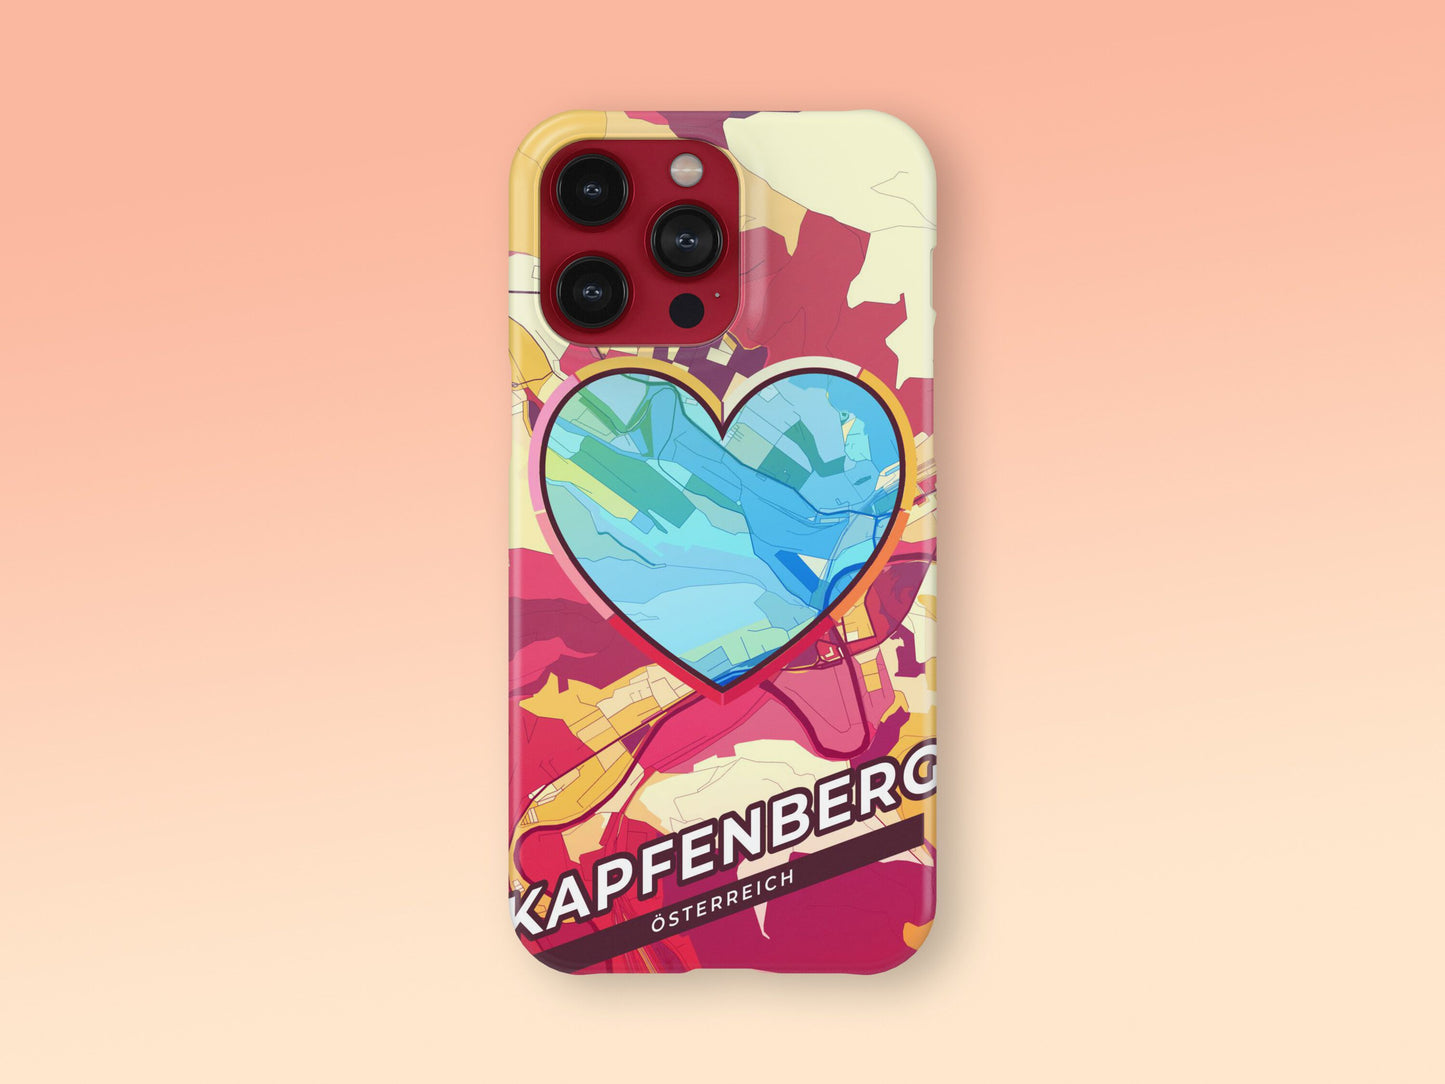 Kapfenberg Österreich slim phone case with colorful icon. Birthday, wedding or housewarming gift. Couple match cases. 2